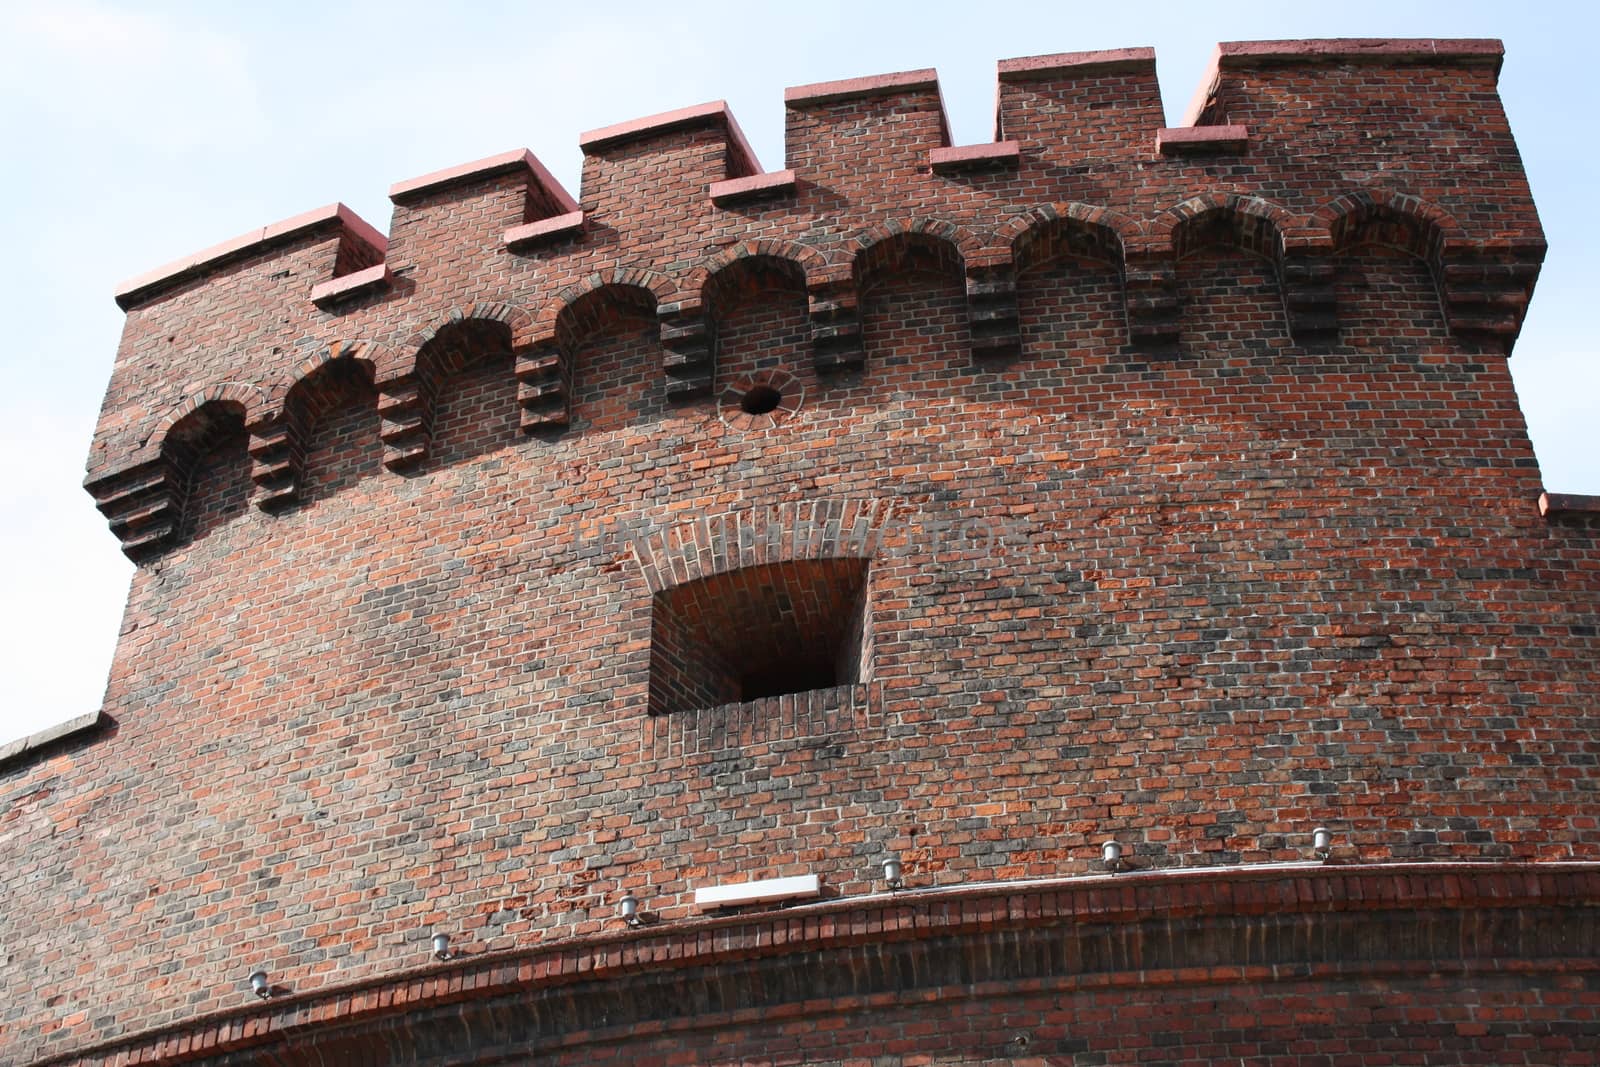 view of the castle in Kaliningrad, tourist attraction in the city.